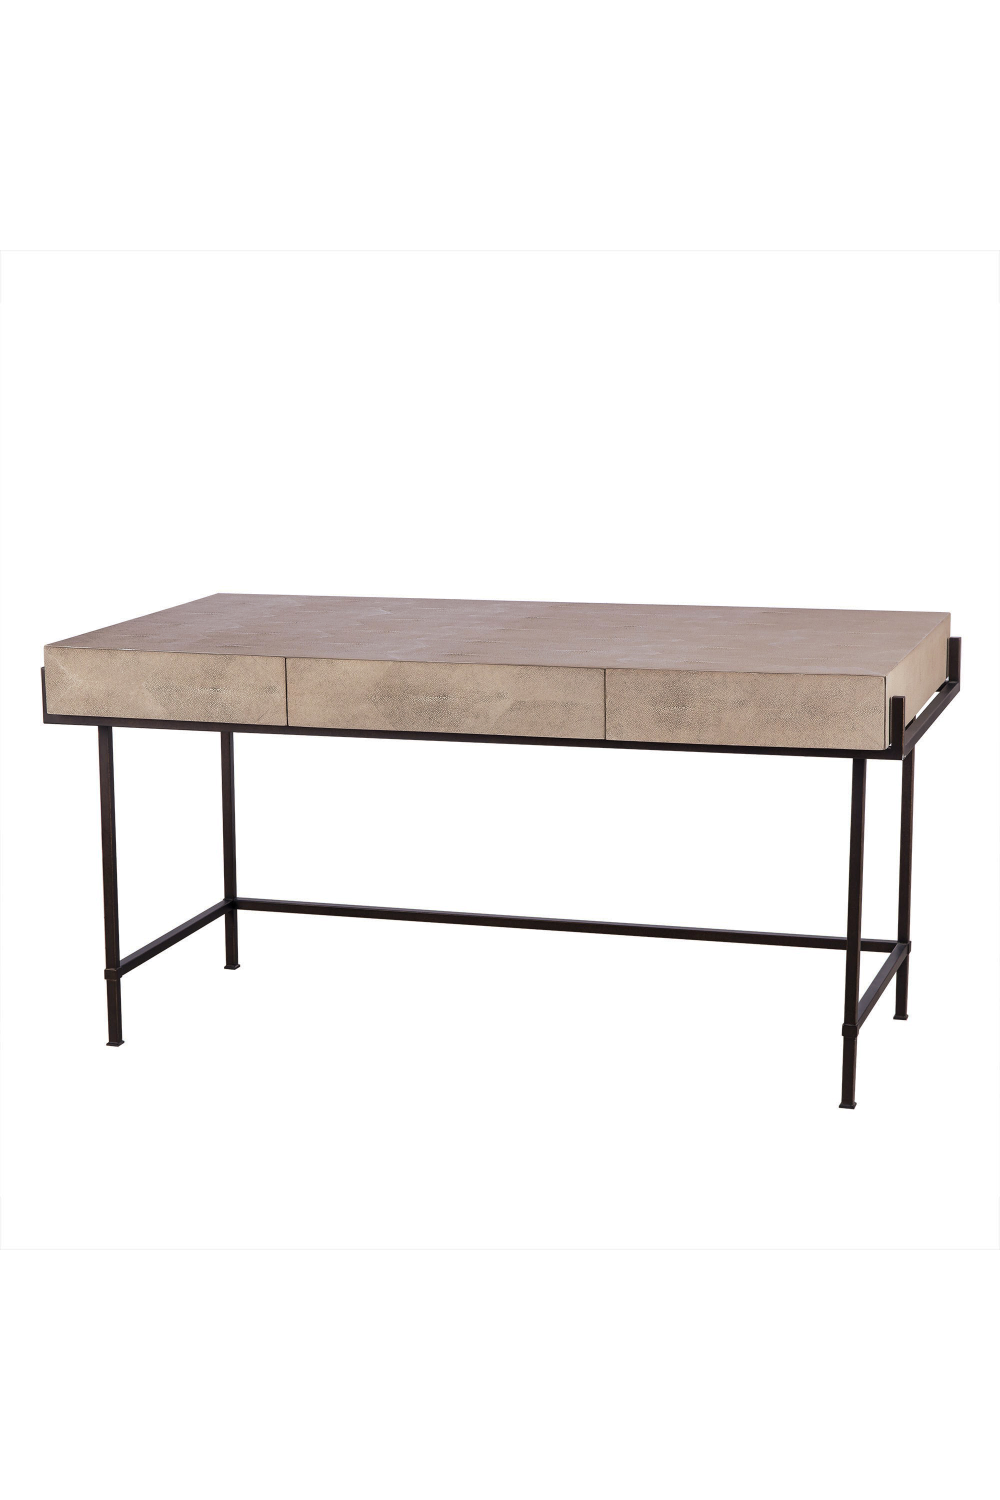 Cream Shagreen Desk with Wooden Drawers | Andrew Martin Mabel